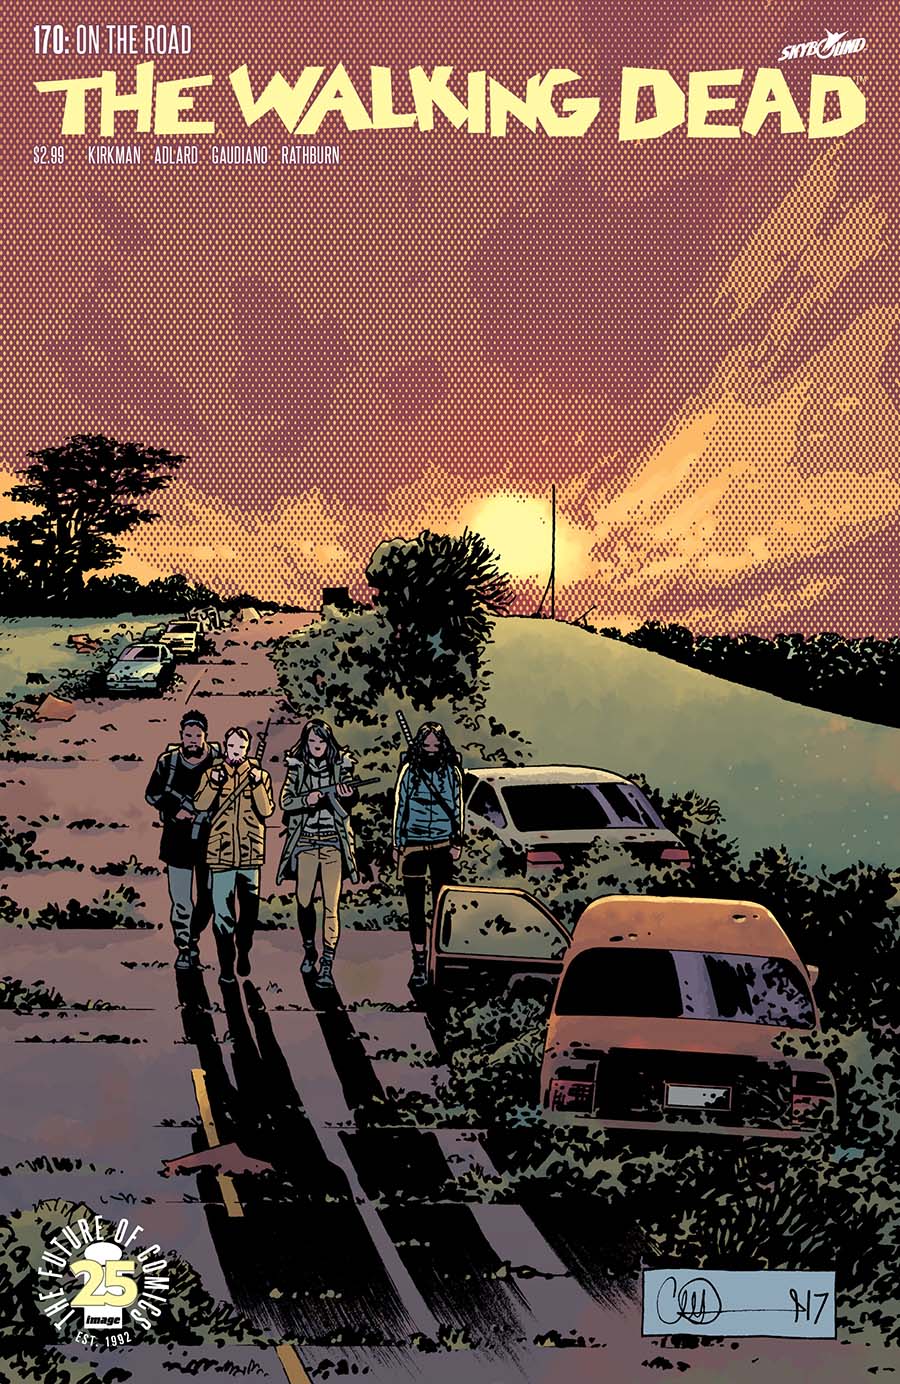 The Walking Dead comic book cover analysis: Issue 170 'On The ... - Undead Walking